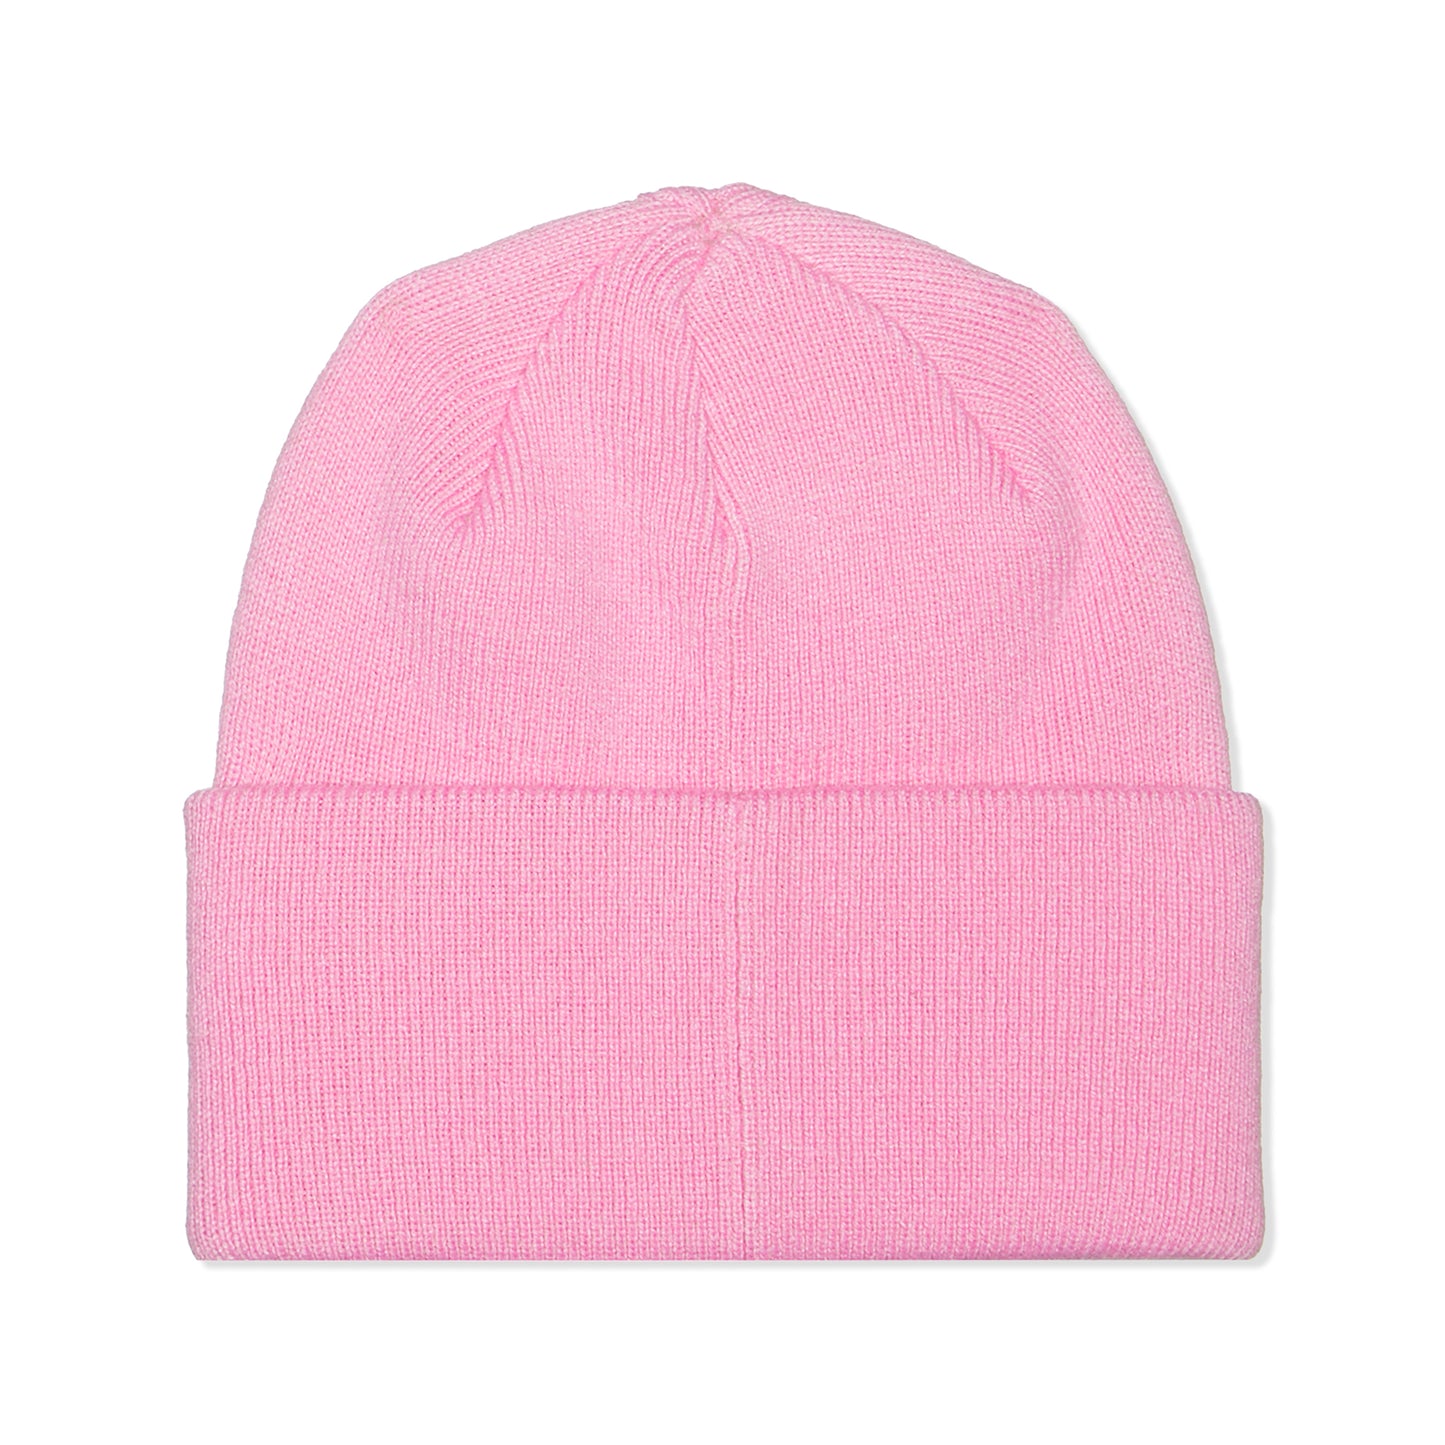 Concepts North – Embossed (Orchid Beanie Face The Pink) Urban